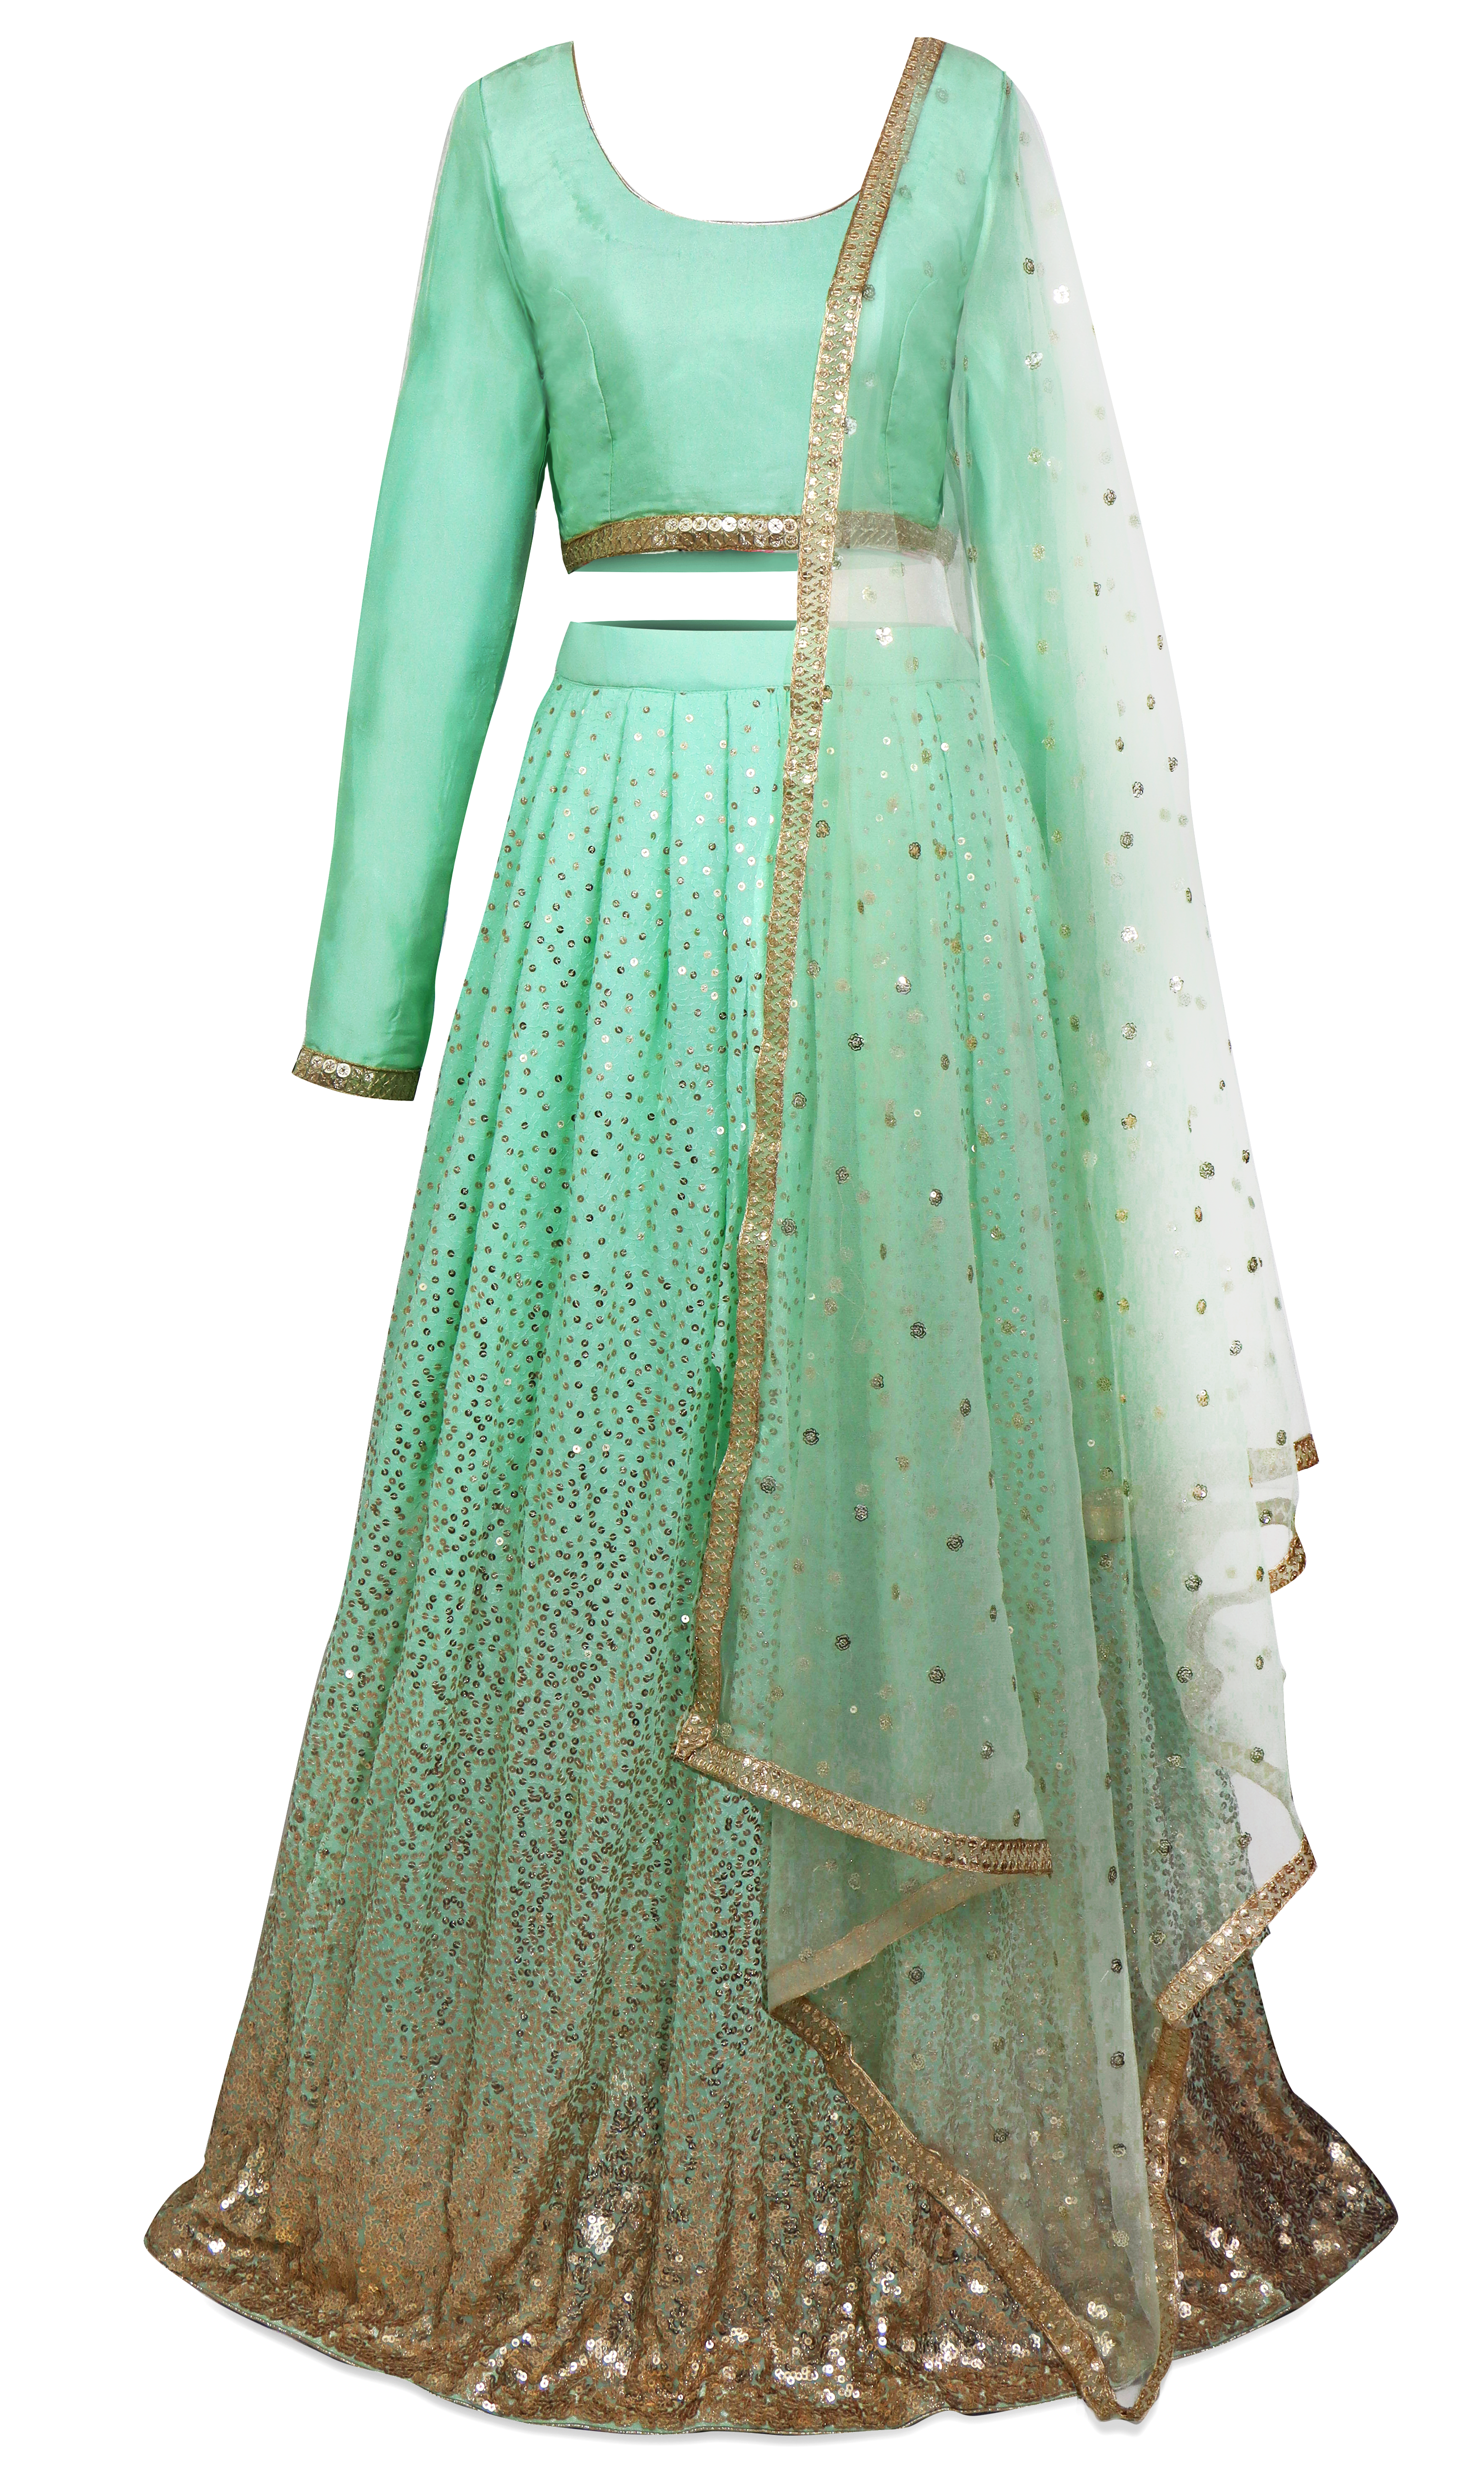 Sky blue Lehenga with pre-stitched blouse and included gold sequin borders of the blouse and dupatta!